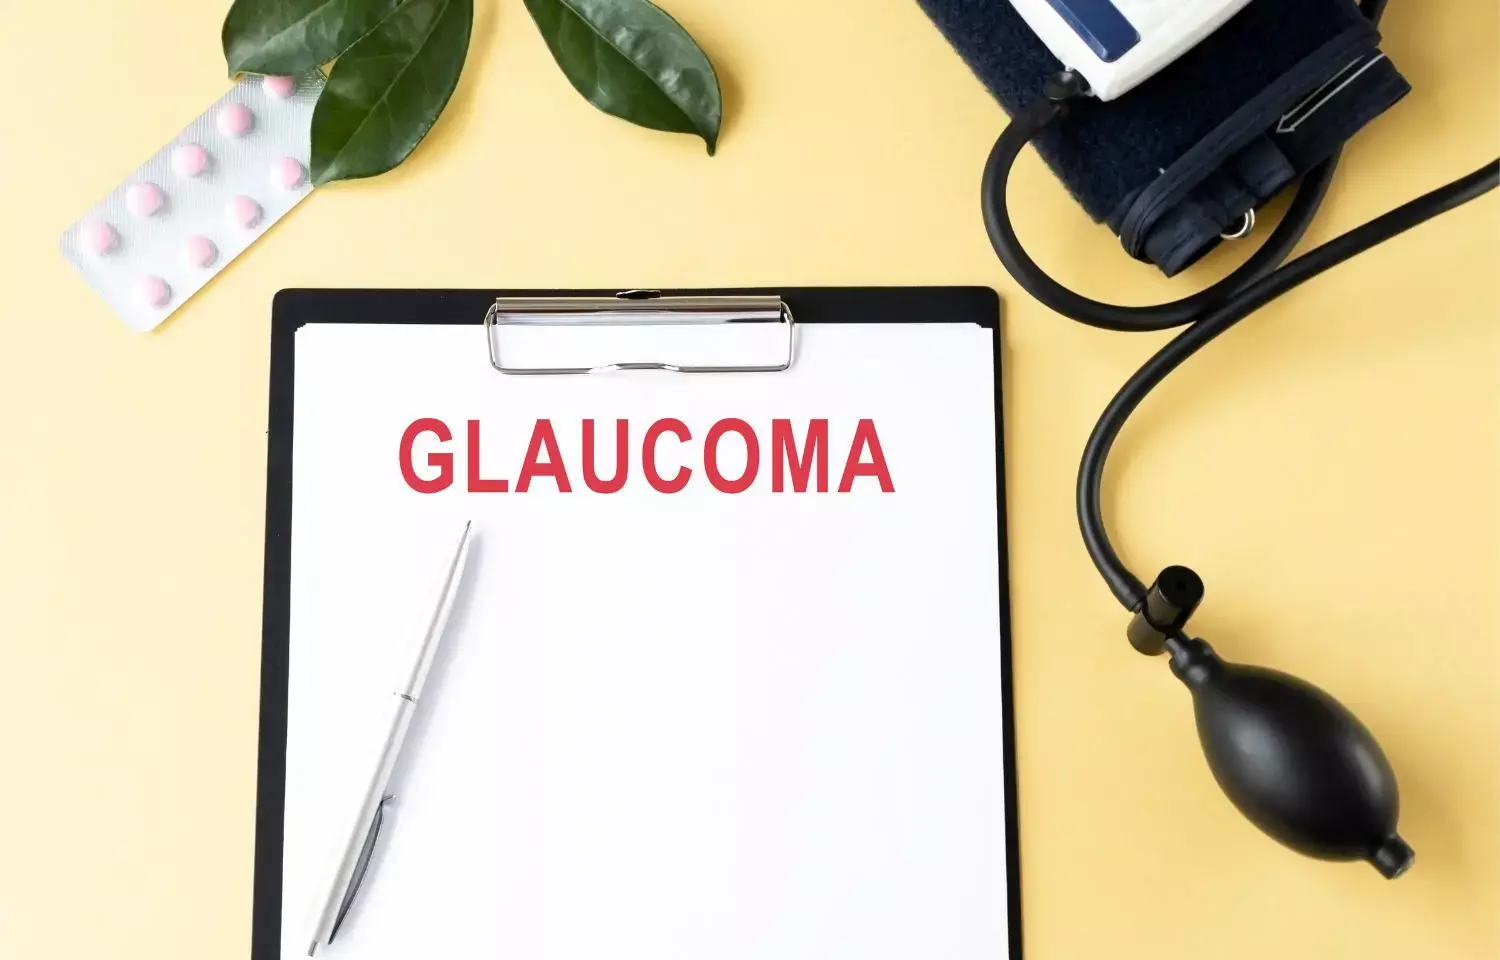 Statins may be used to treat primary open-angle glaucoma associated with lower ABCA1 expression